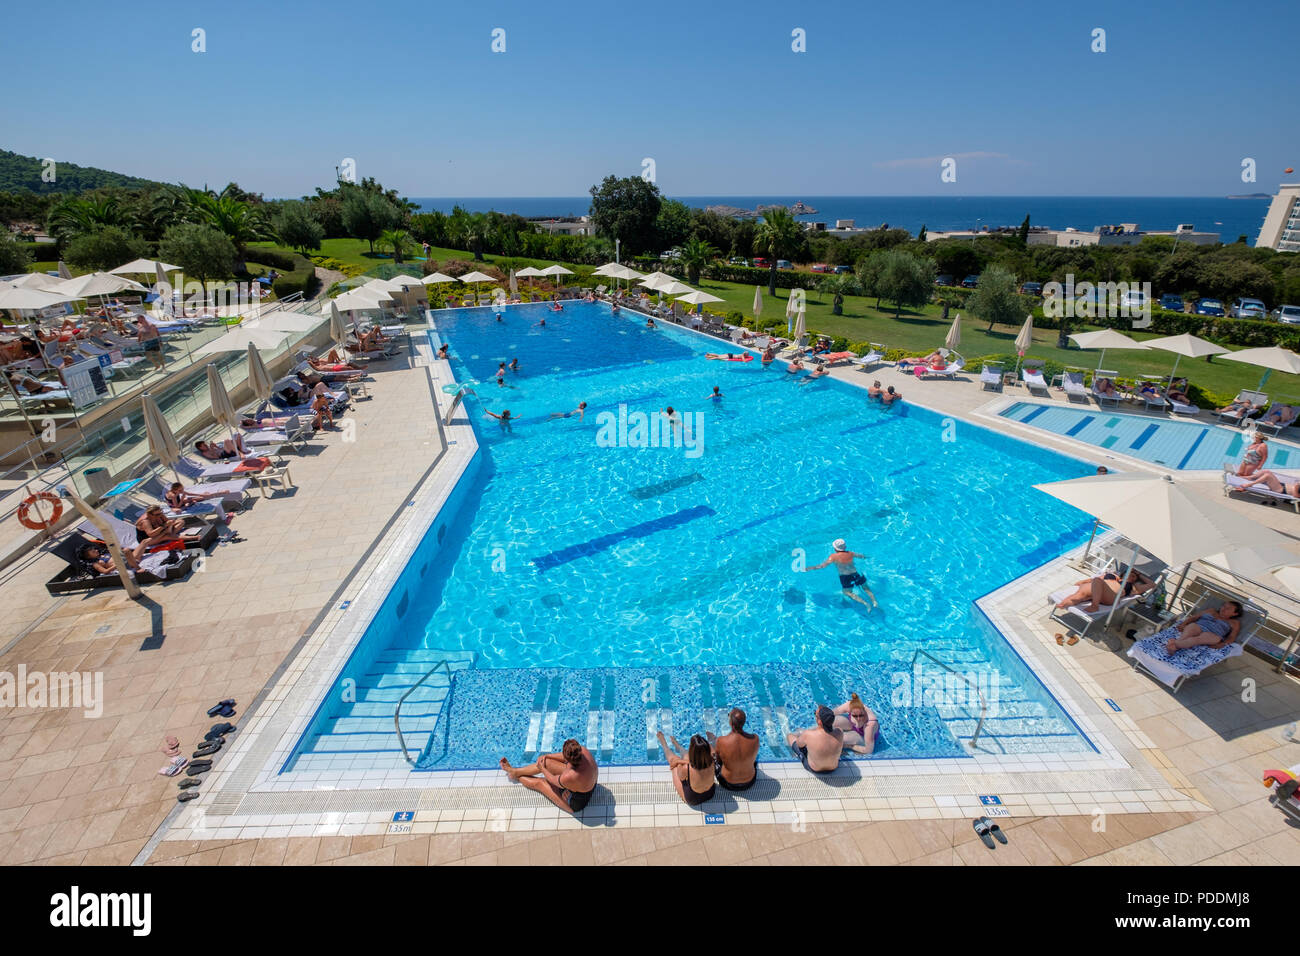 Outdoor swimming pool at the Valamar Lacroma Hotel in Dubrovnik, Croatia, Europe Stock Photo